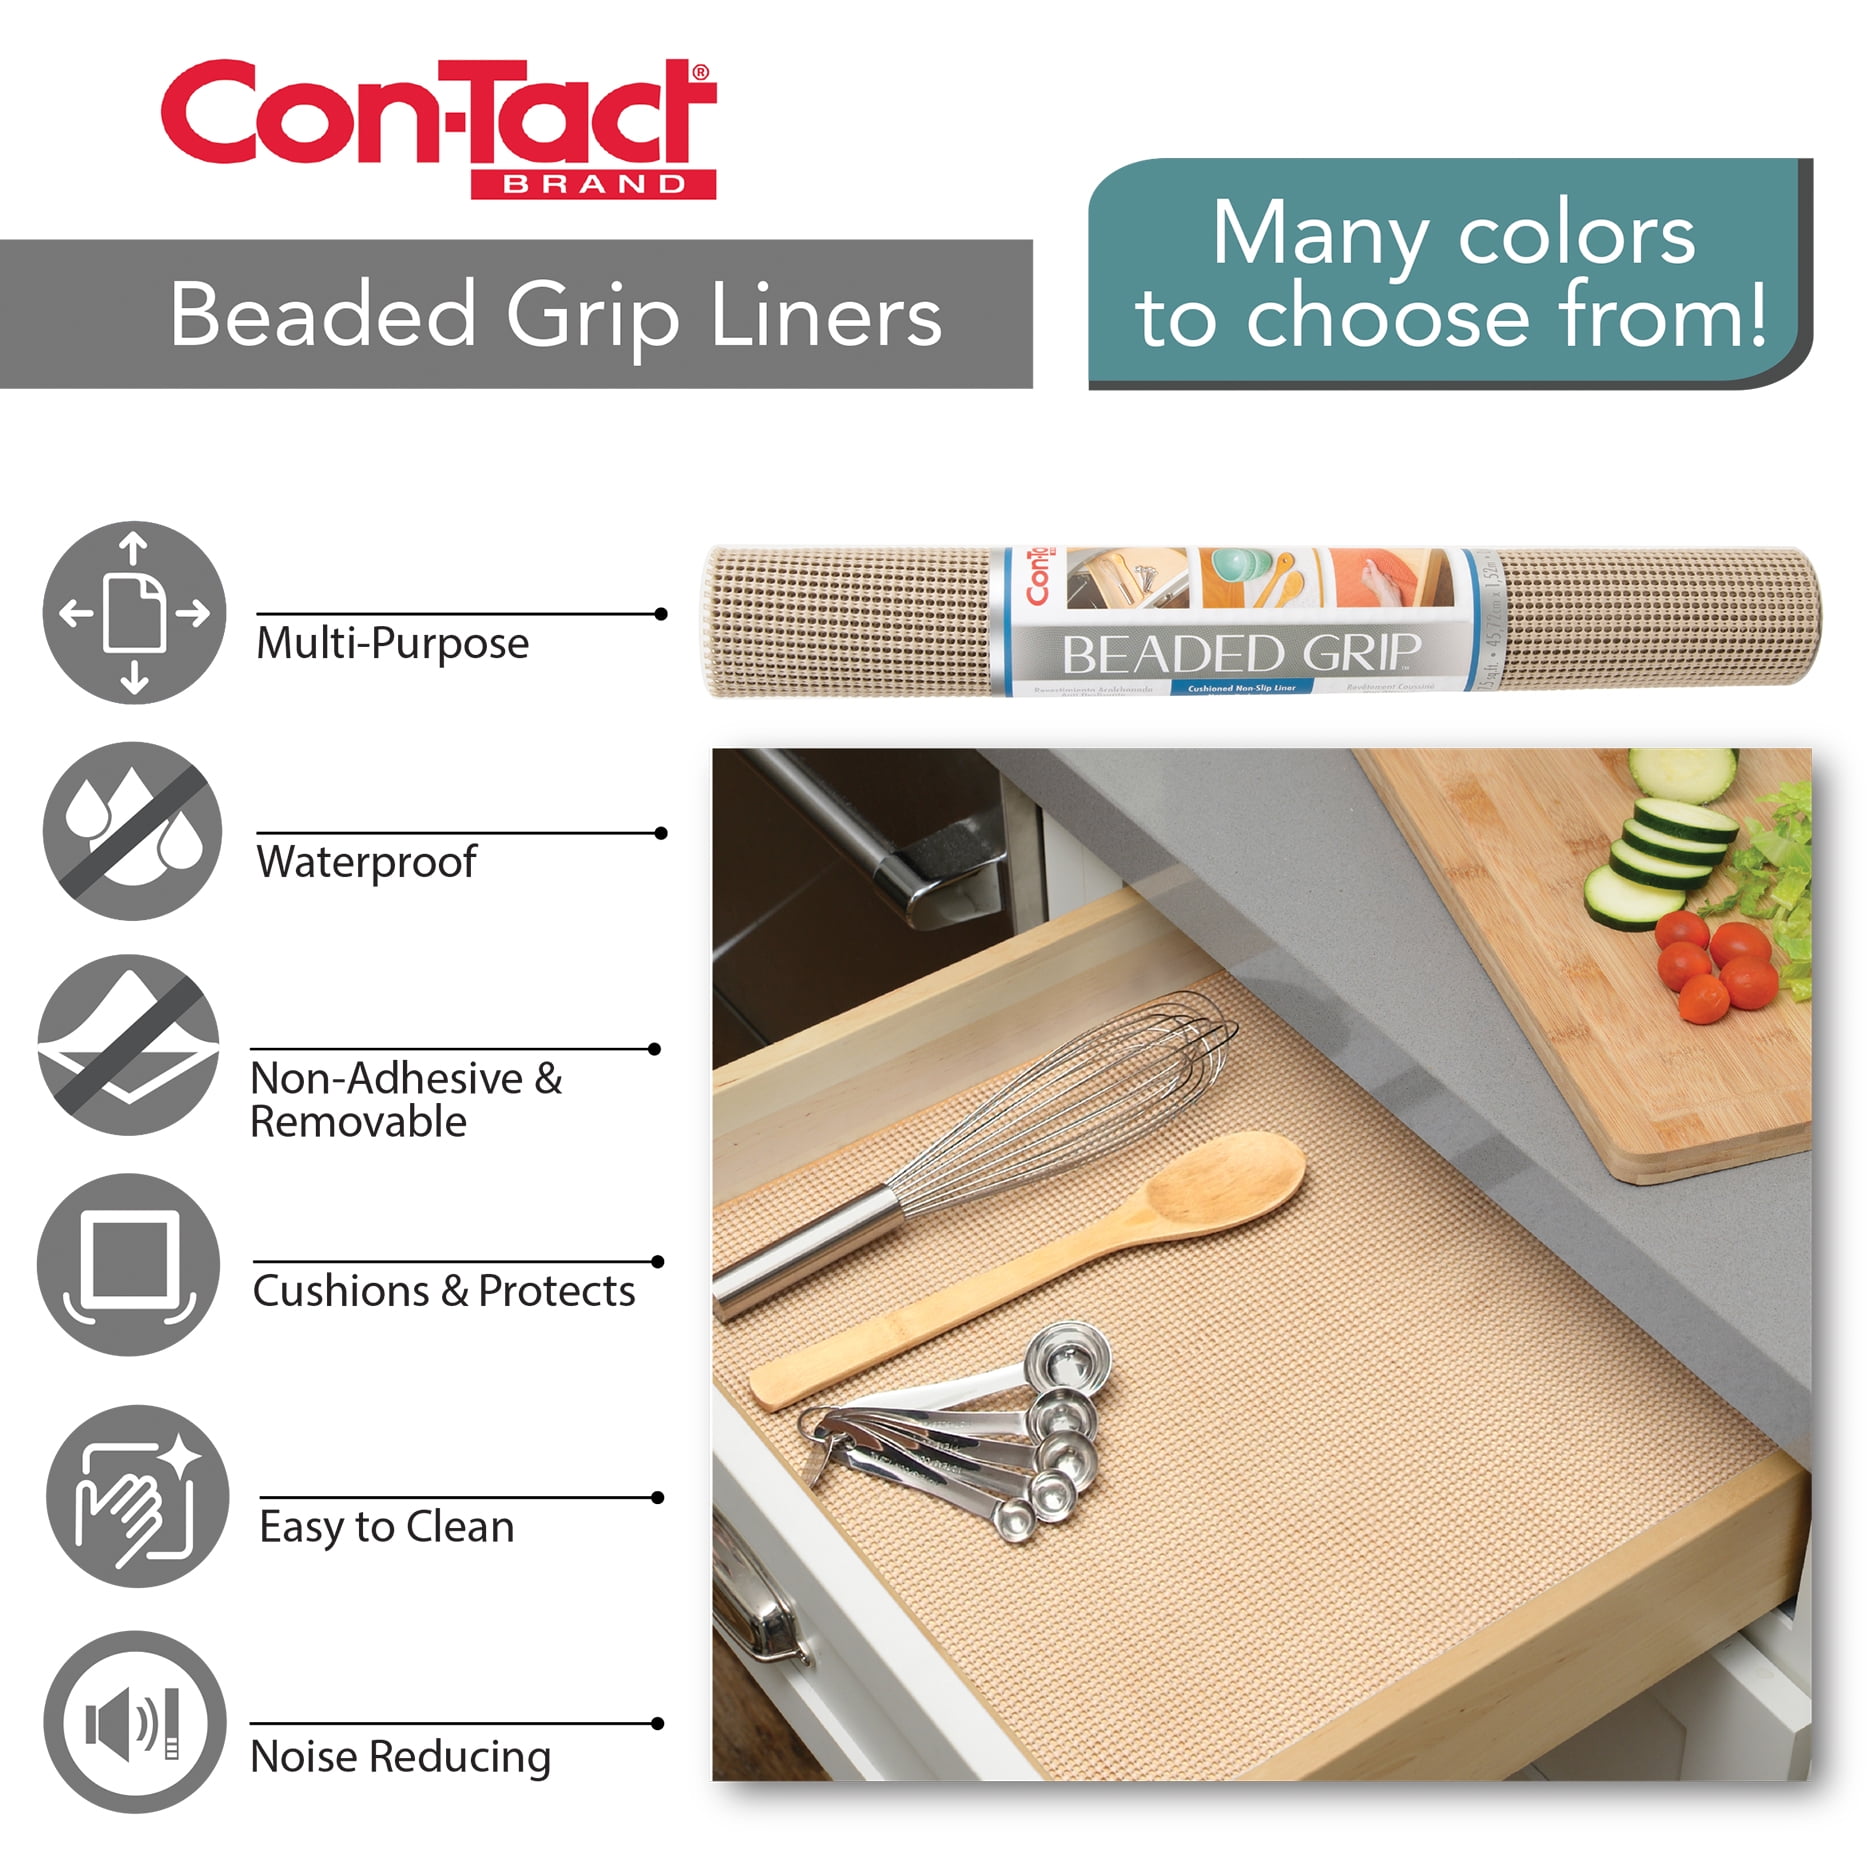 Con-Tact 20 In. x 5 Ft. White Beaded Grip Non-Adhesive Shelf Liner